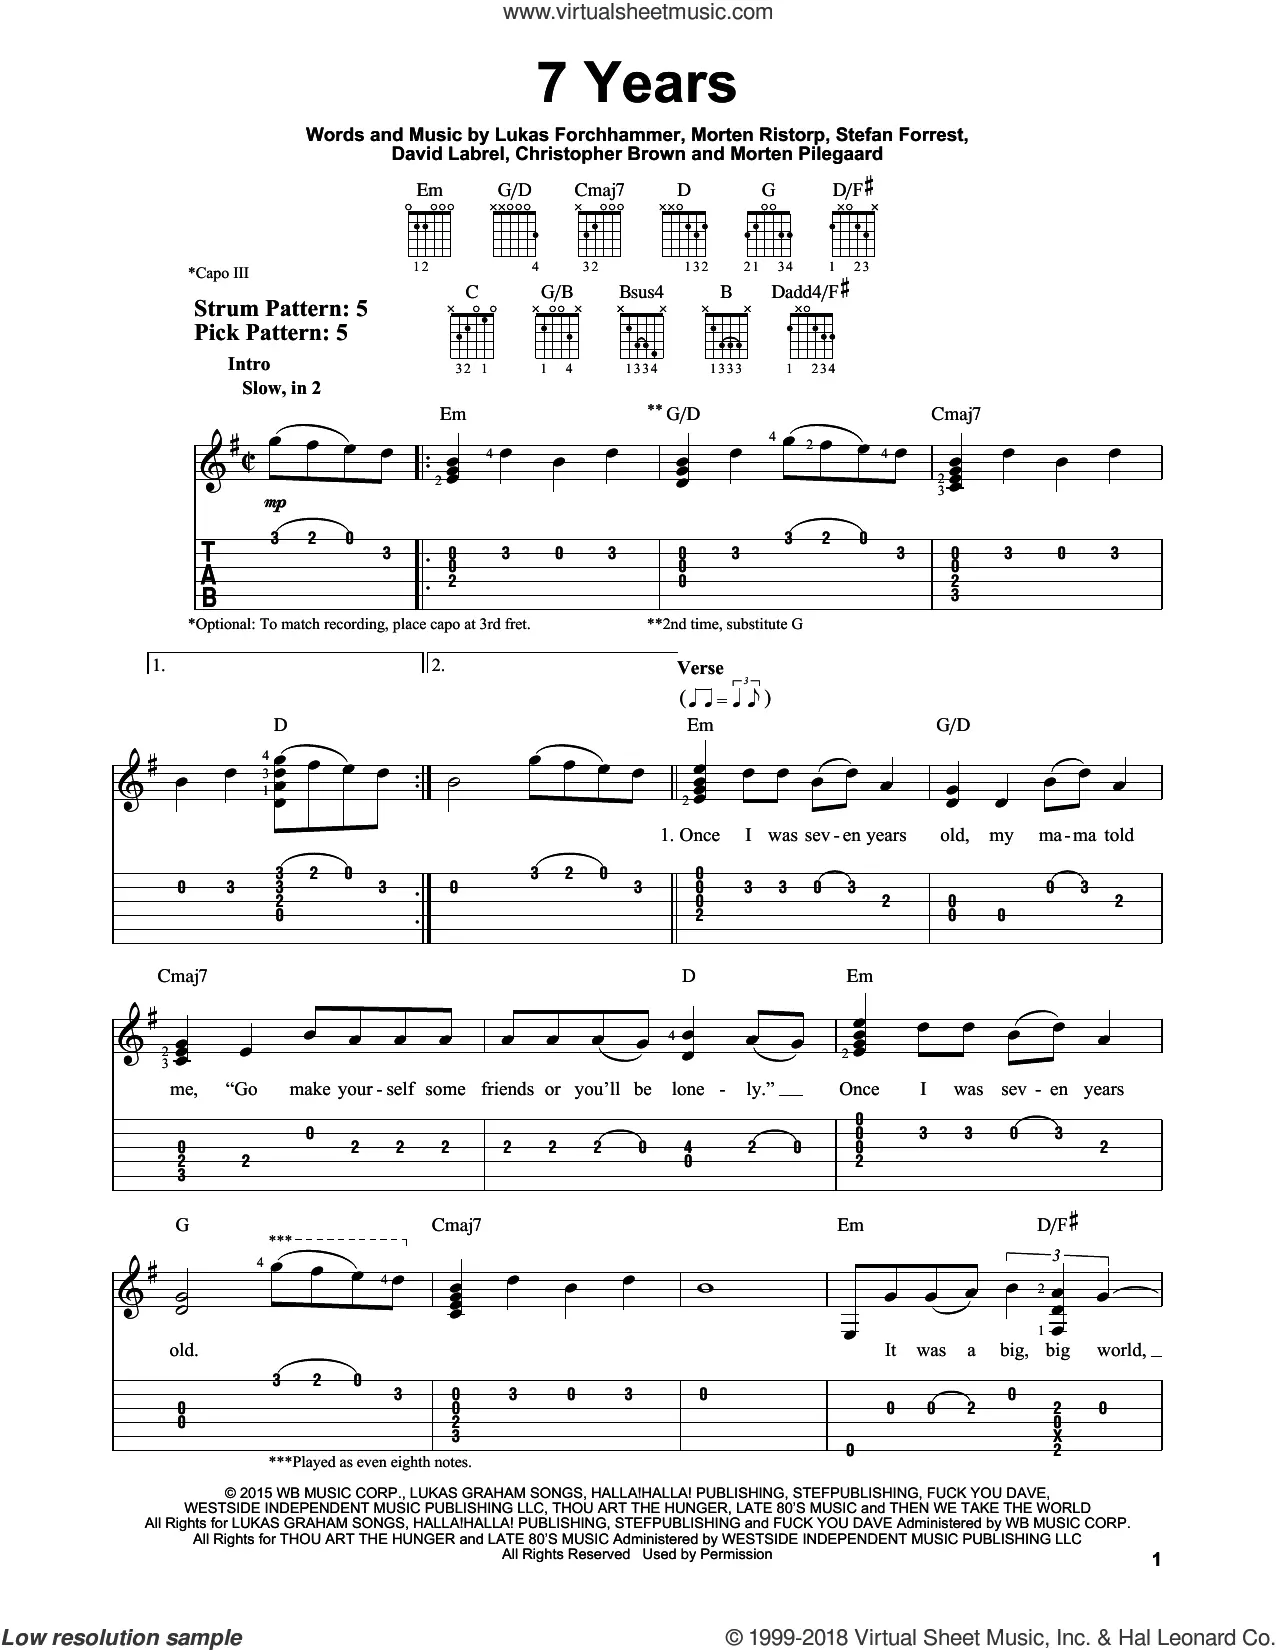 Download Sheet Music of Graham Guitar notes and tablatures